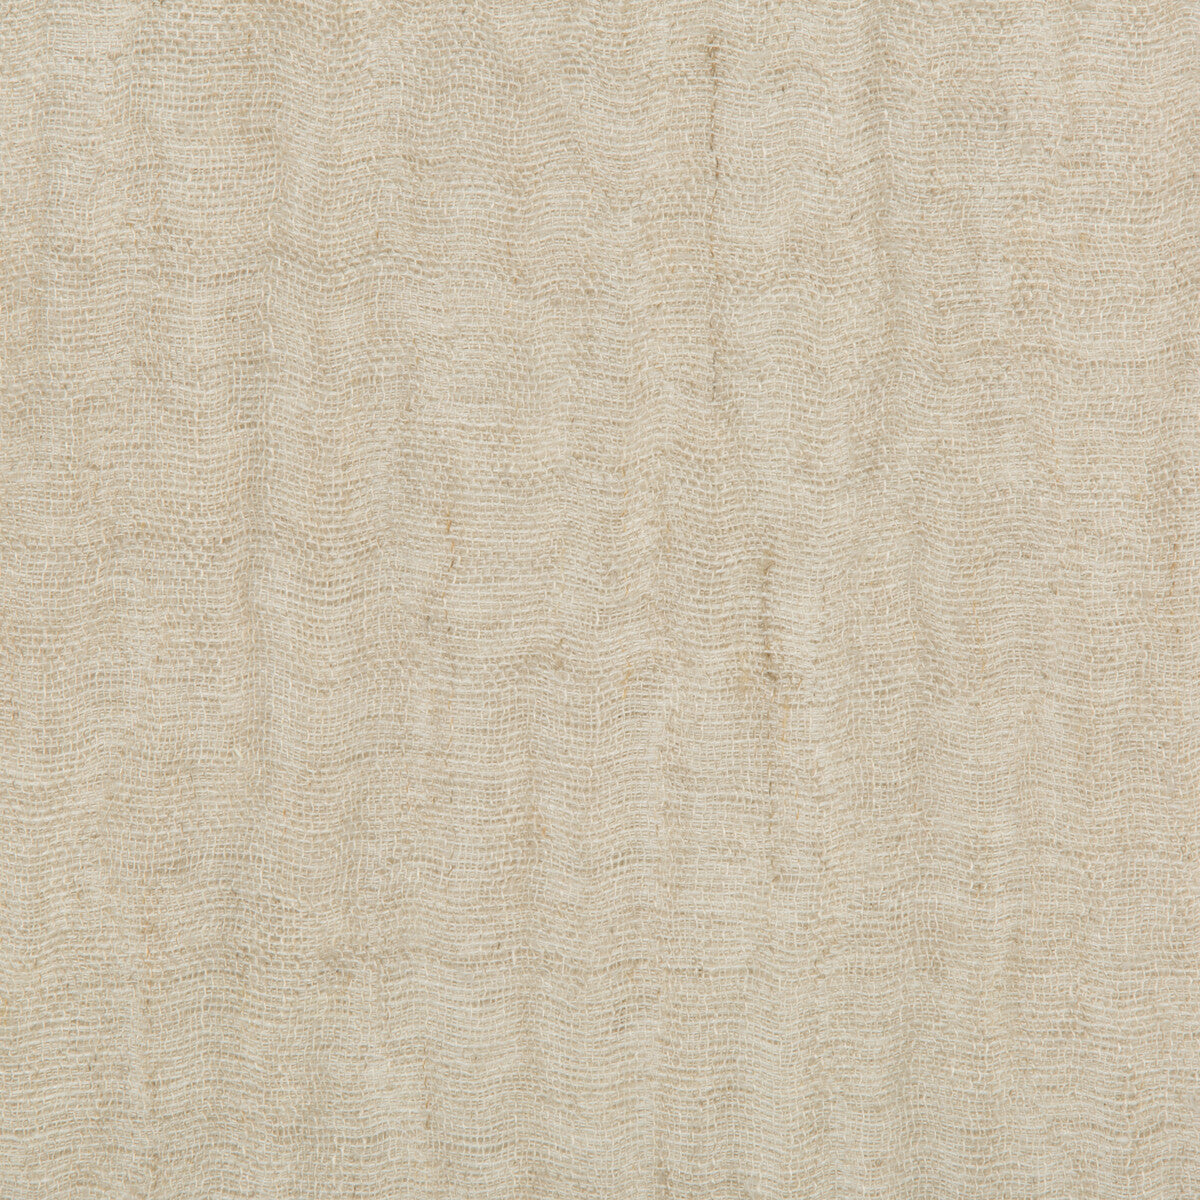 Crimped fabric in linen color - pattern 4483.16.0 - by Kravet Couture in the Sue Firestone Malibu collection